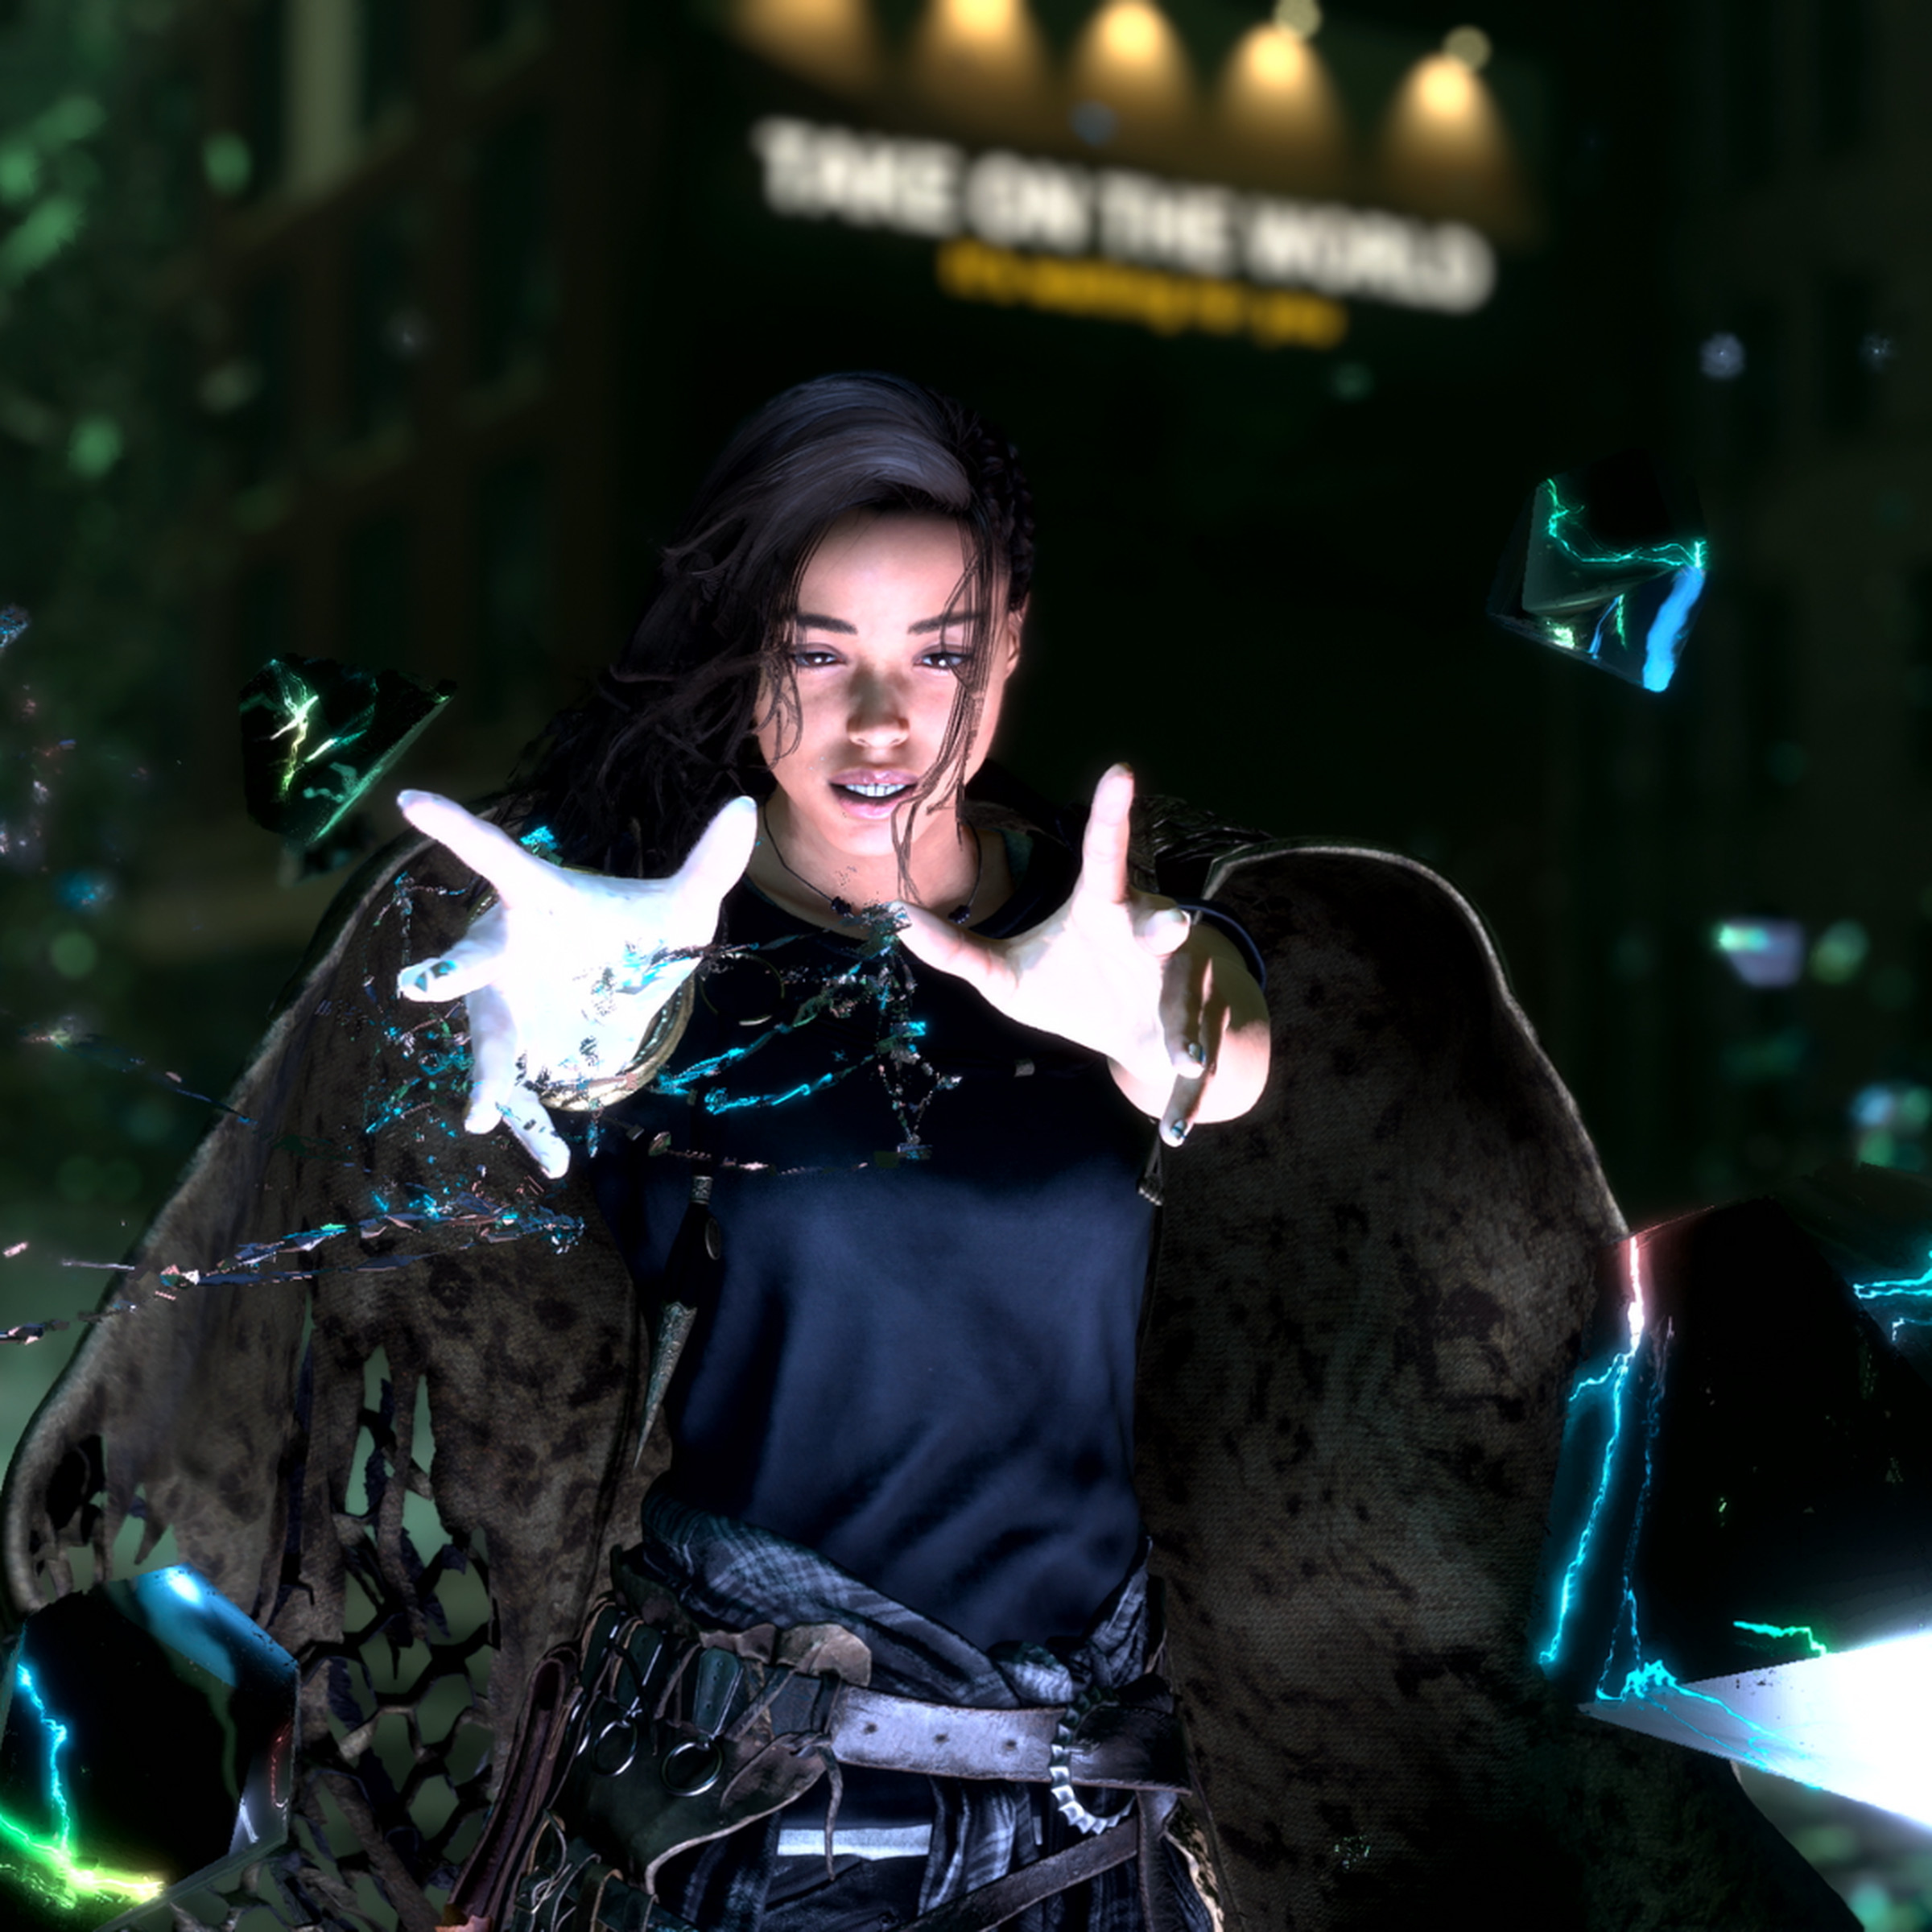 Screenshot from Forspoken featuring the protagonist Frey casting a magical spell with her hands outstretched in front of her.